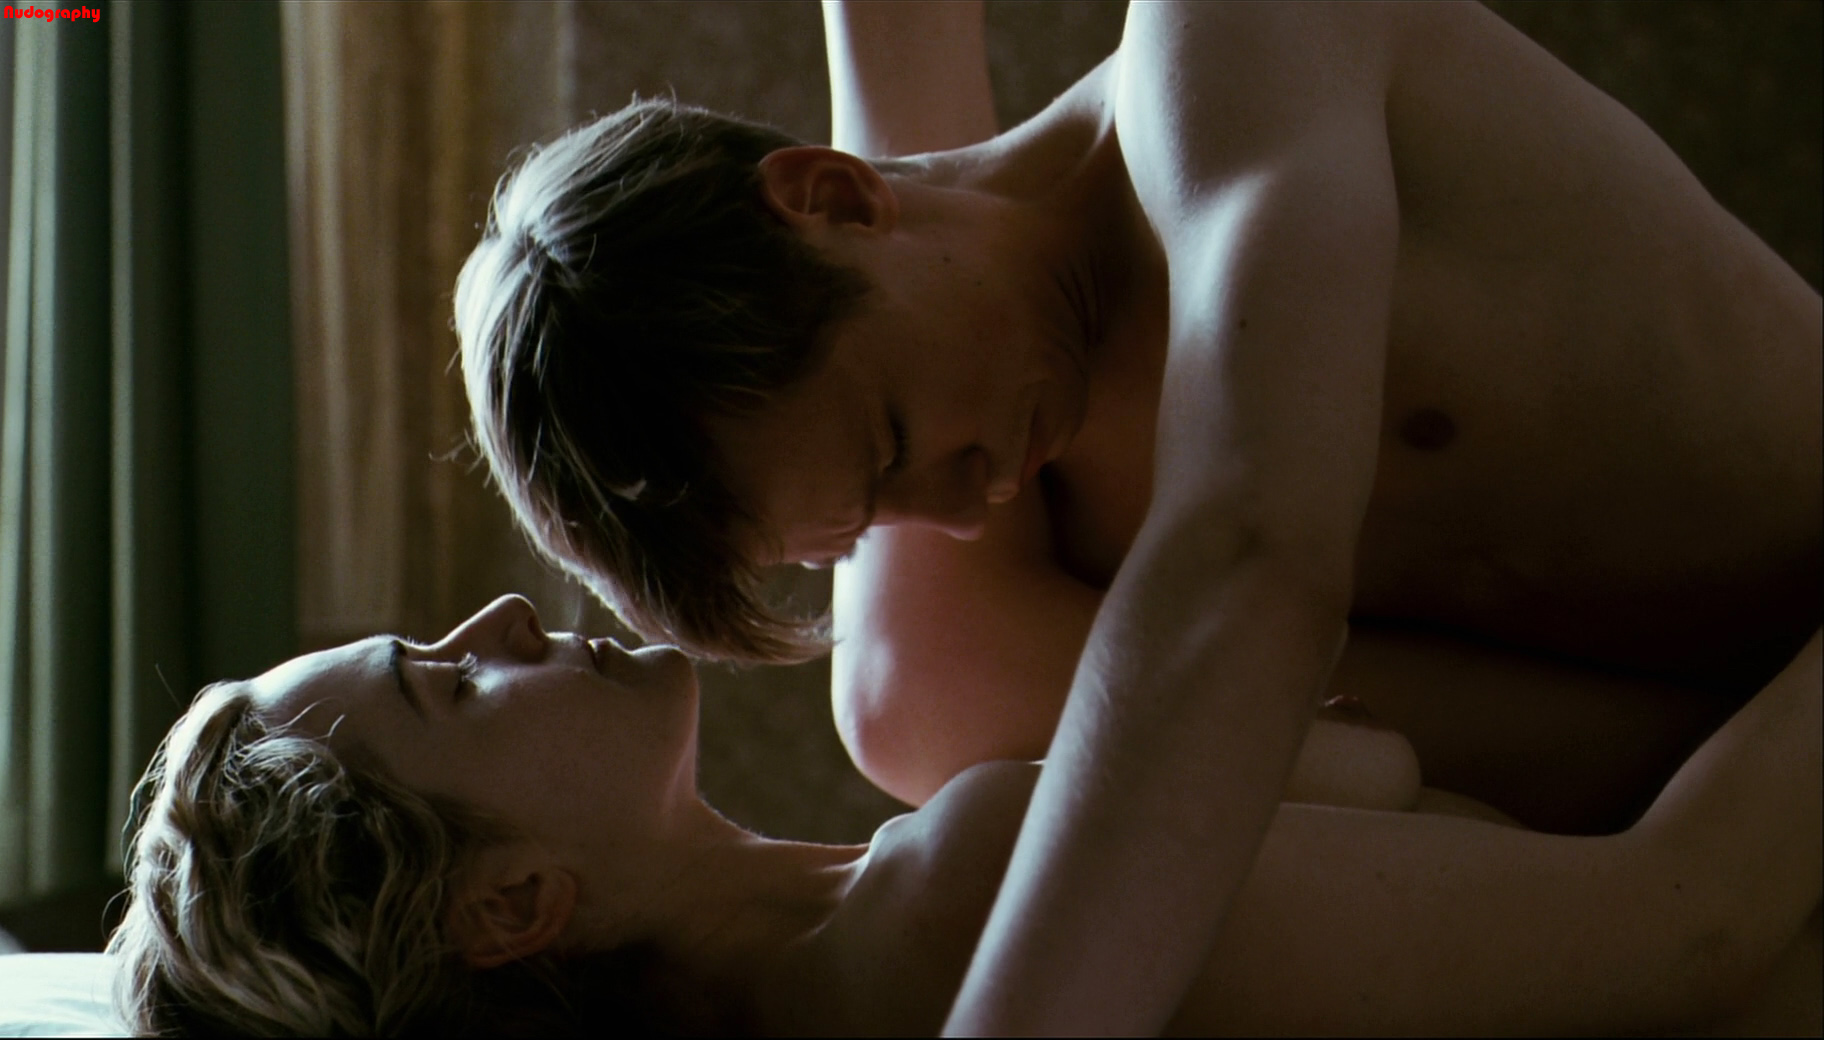 Nude Celebs in HD - Kate Winslet - picture - 2009_6/original/Kate_Winslet_T...